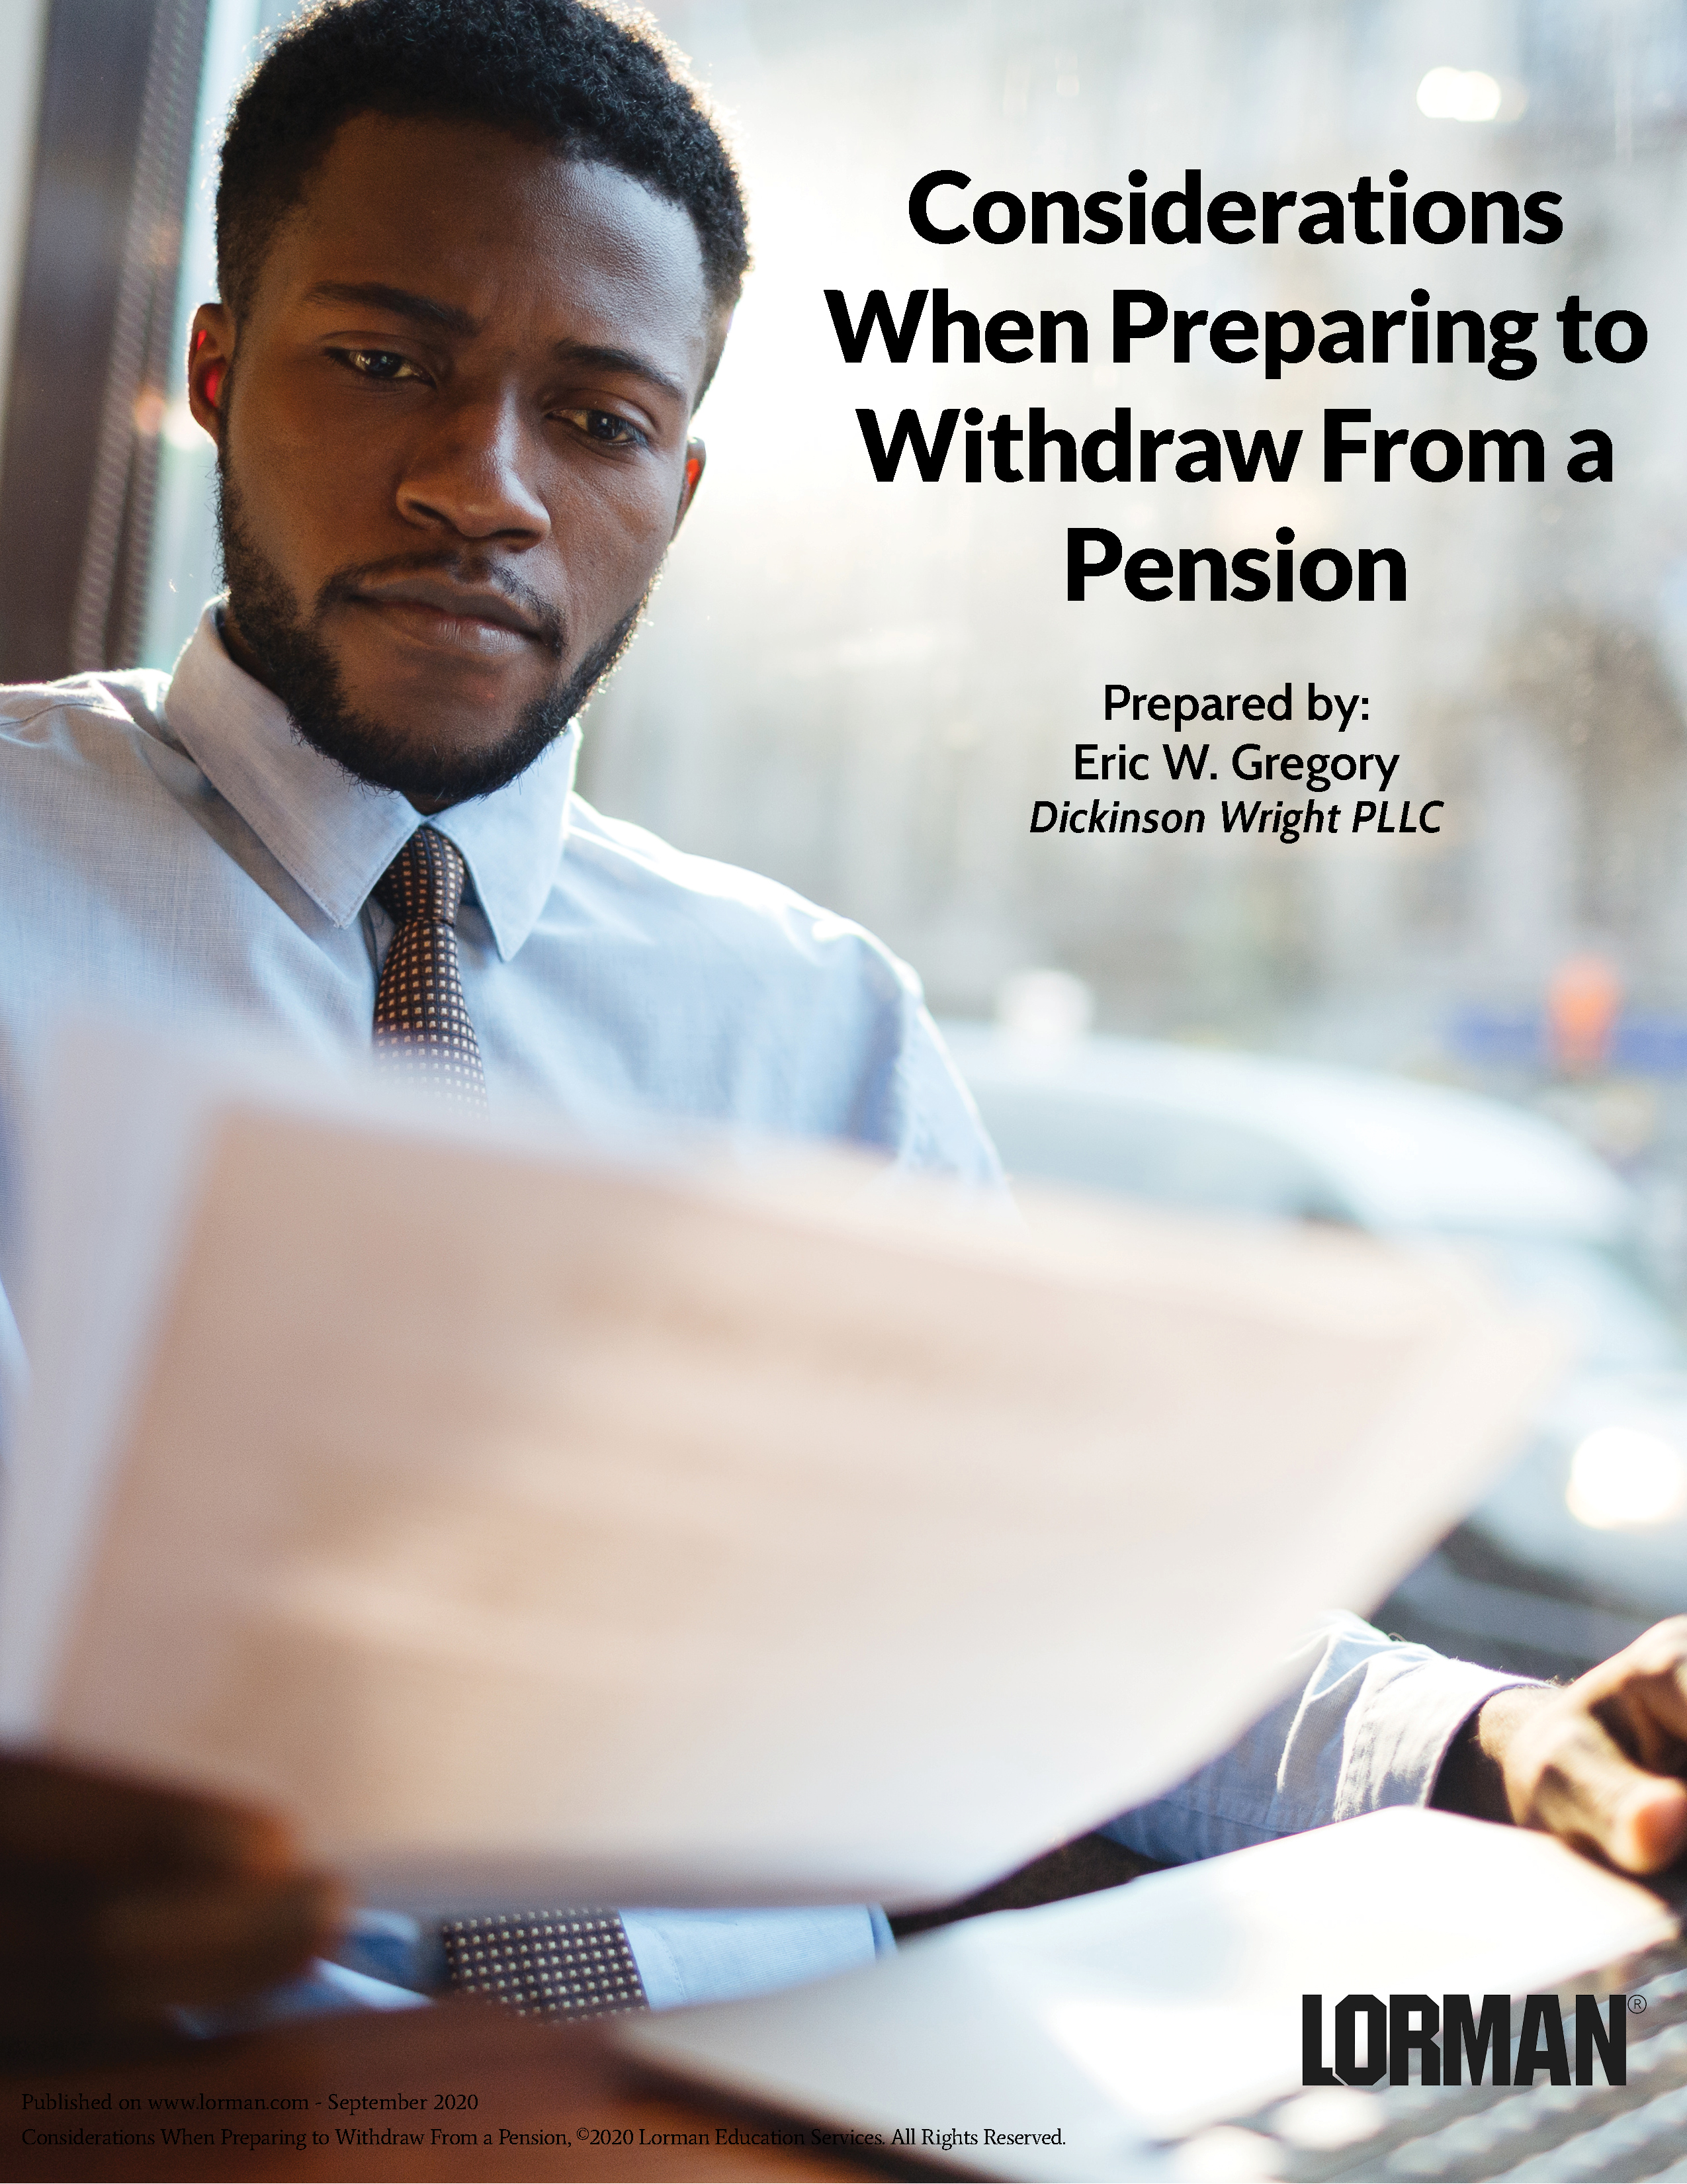 Considerations When Preparing to Withdraw From a Pension